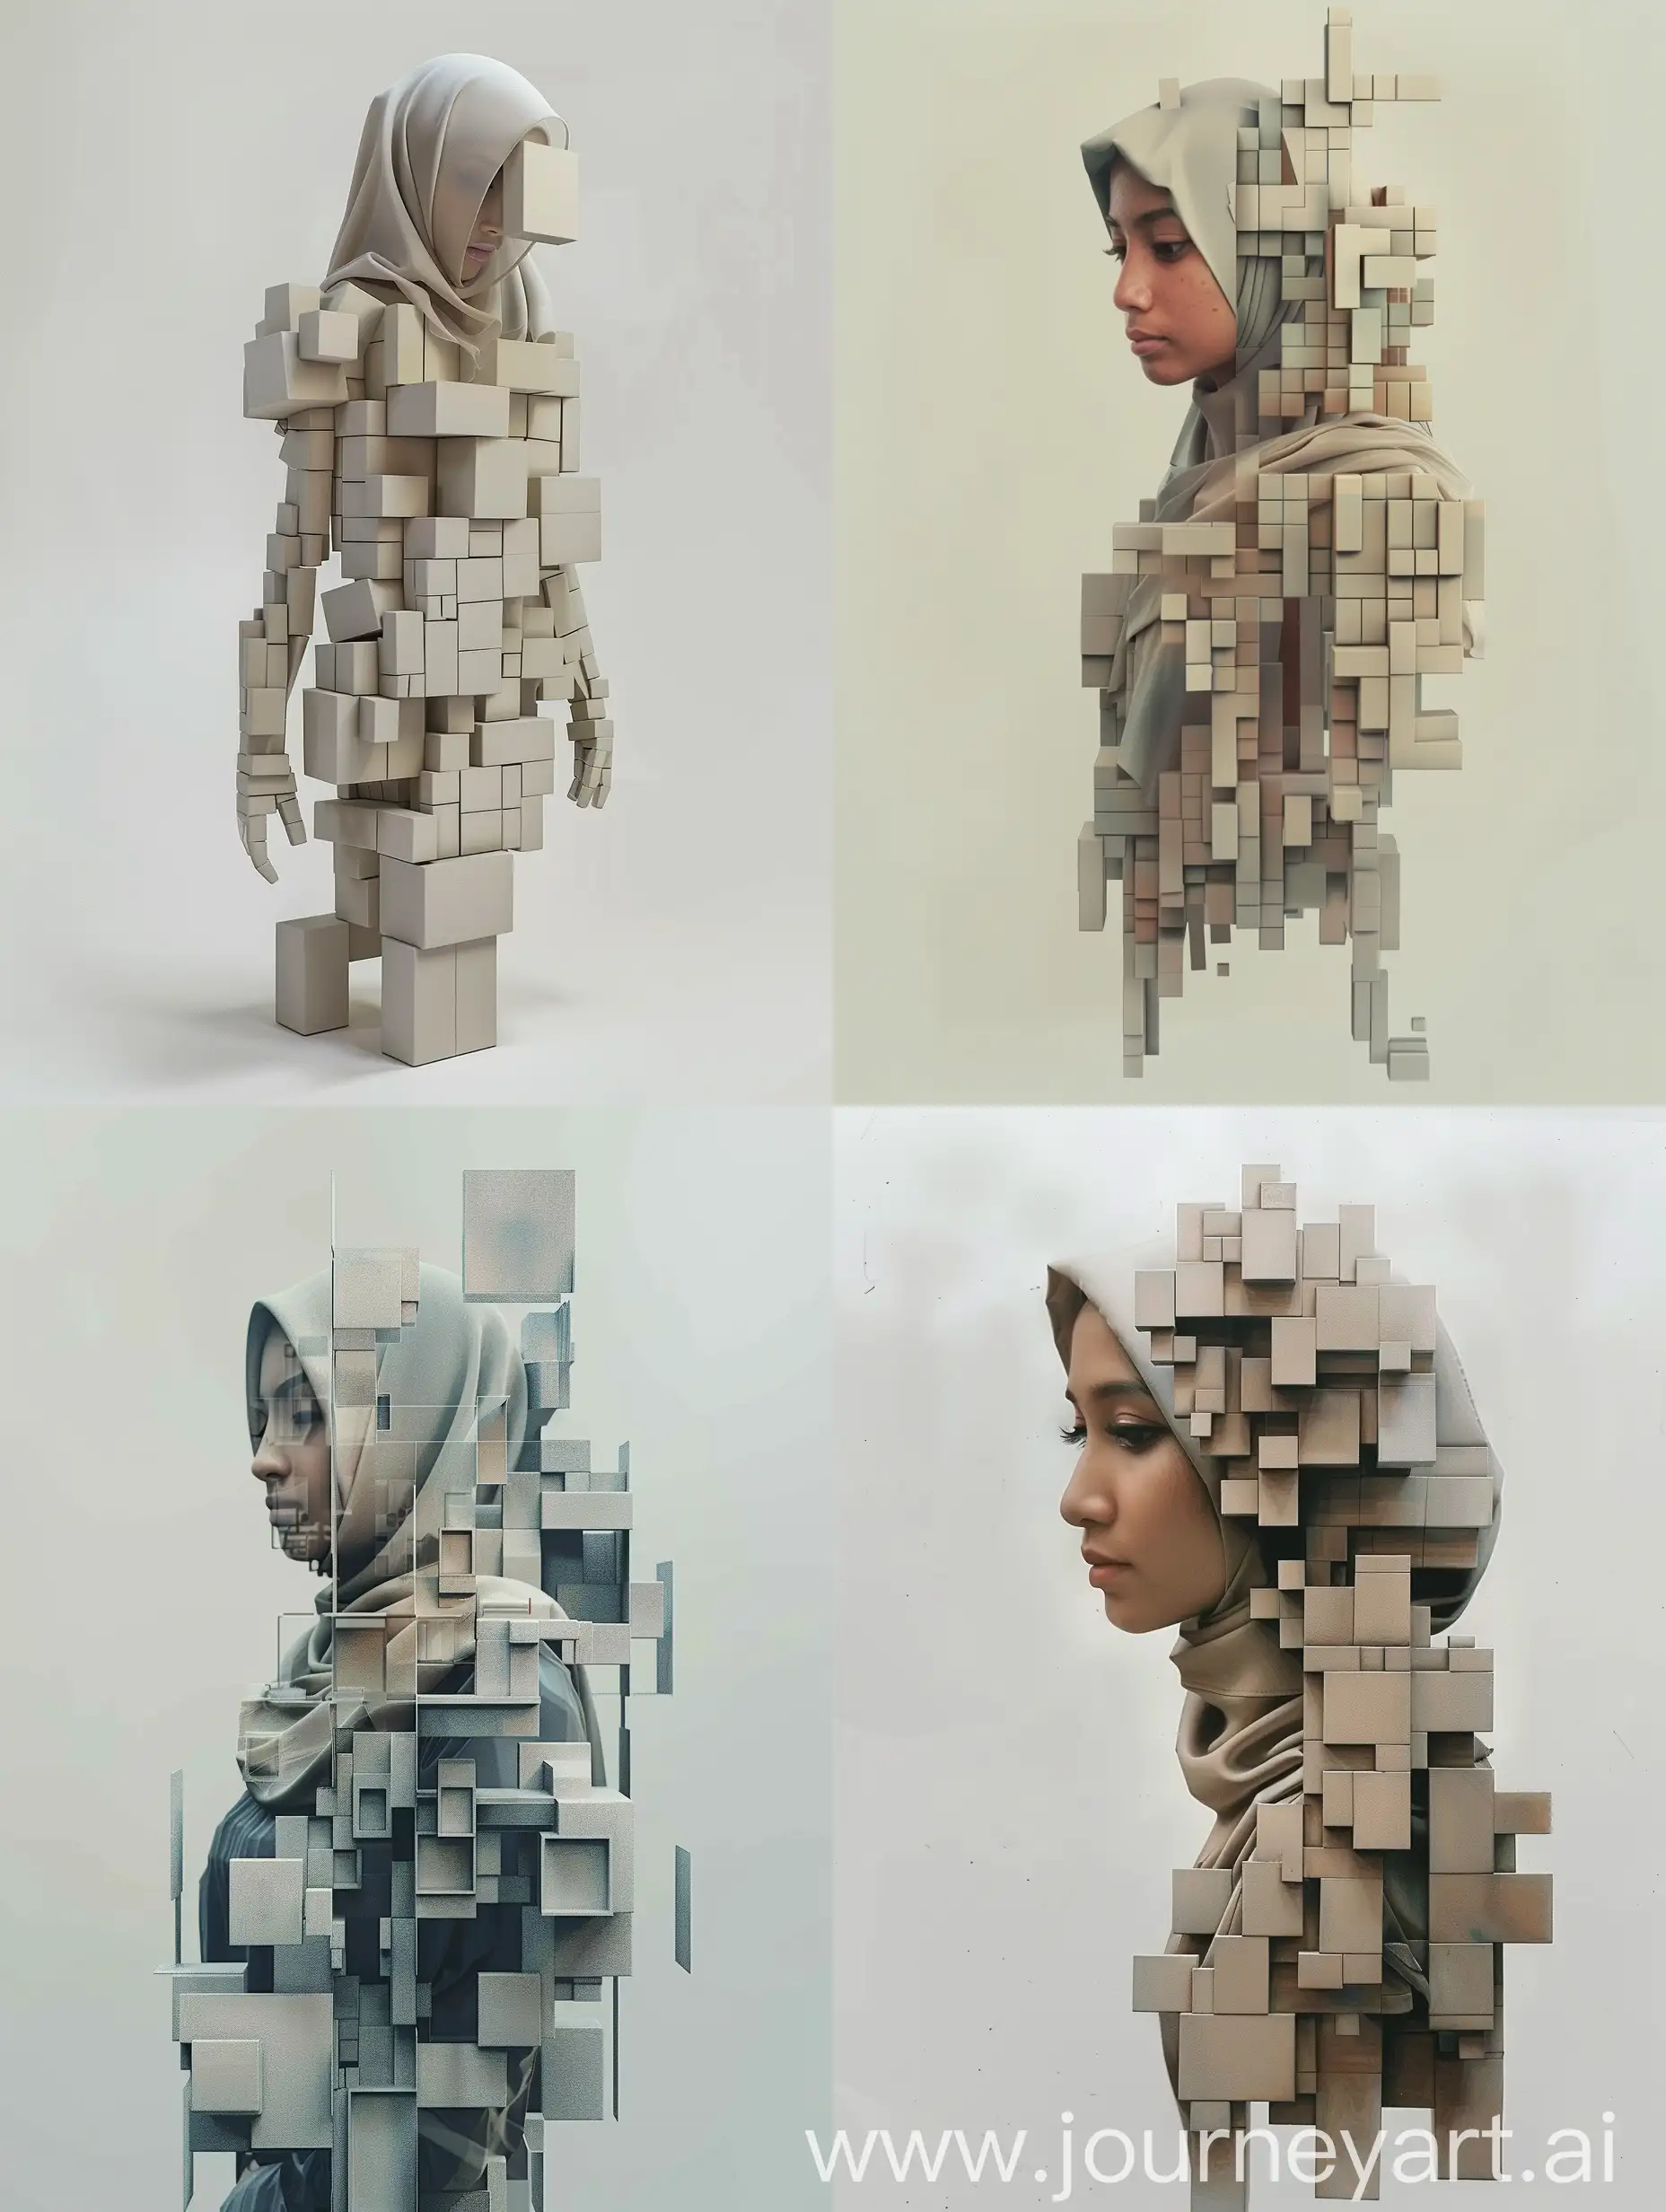 Make a picture of a beautiful Indonesian hijab woman consisting entirely of cubes of various sizes. The figure will appear as if it were made from these geometric shapes, with different cubes forming the head, torso, arms, and legs. The cubes vary in size to represent different body parts proportionally, creating a visually interesting and abstract representation of the human body. The composition should be clear, with a focus on how the blocks are assembled to mimic human anatomy. The background should be neutral to make the image stand out